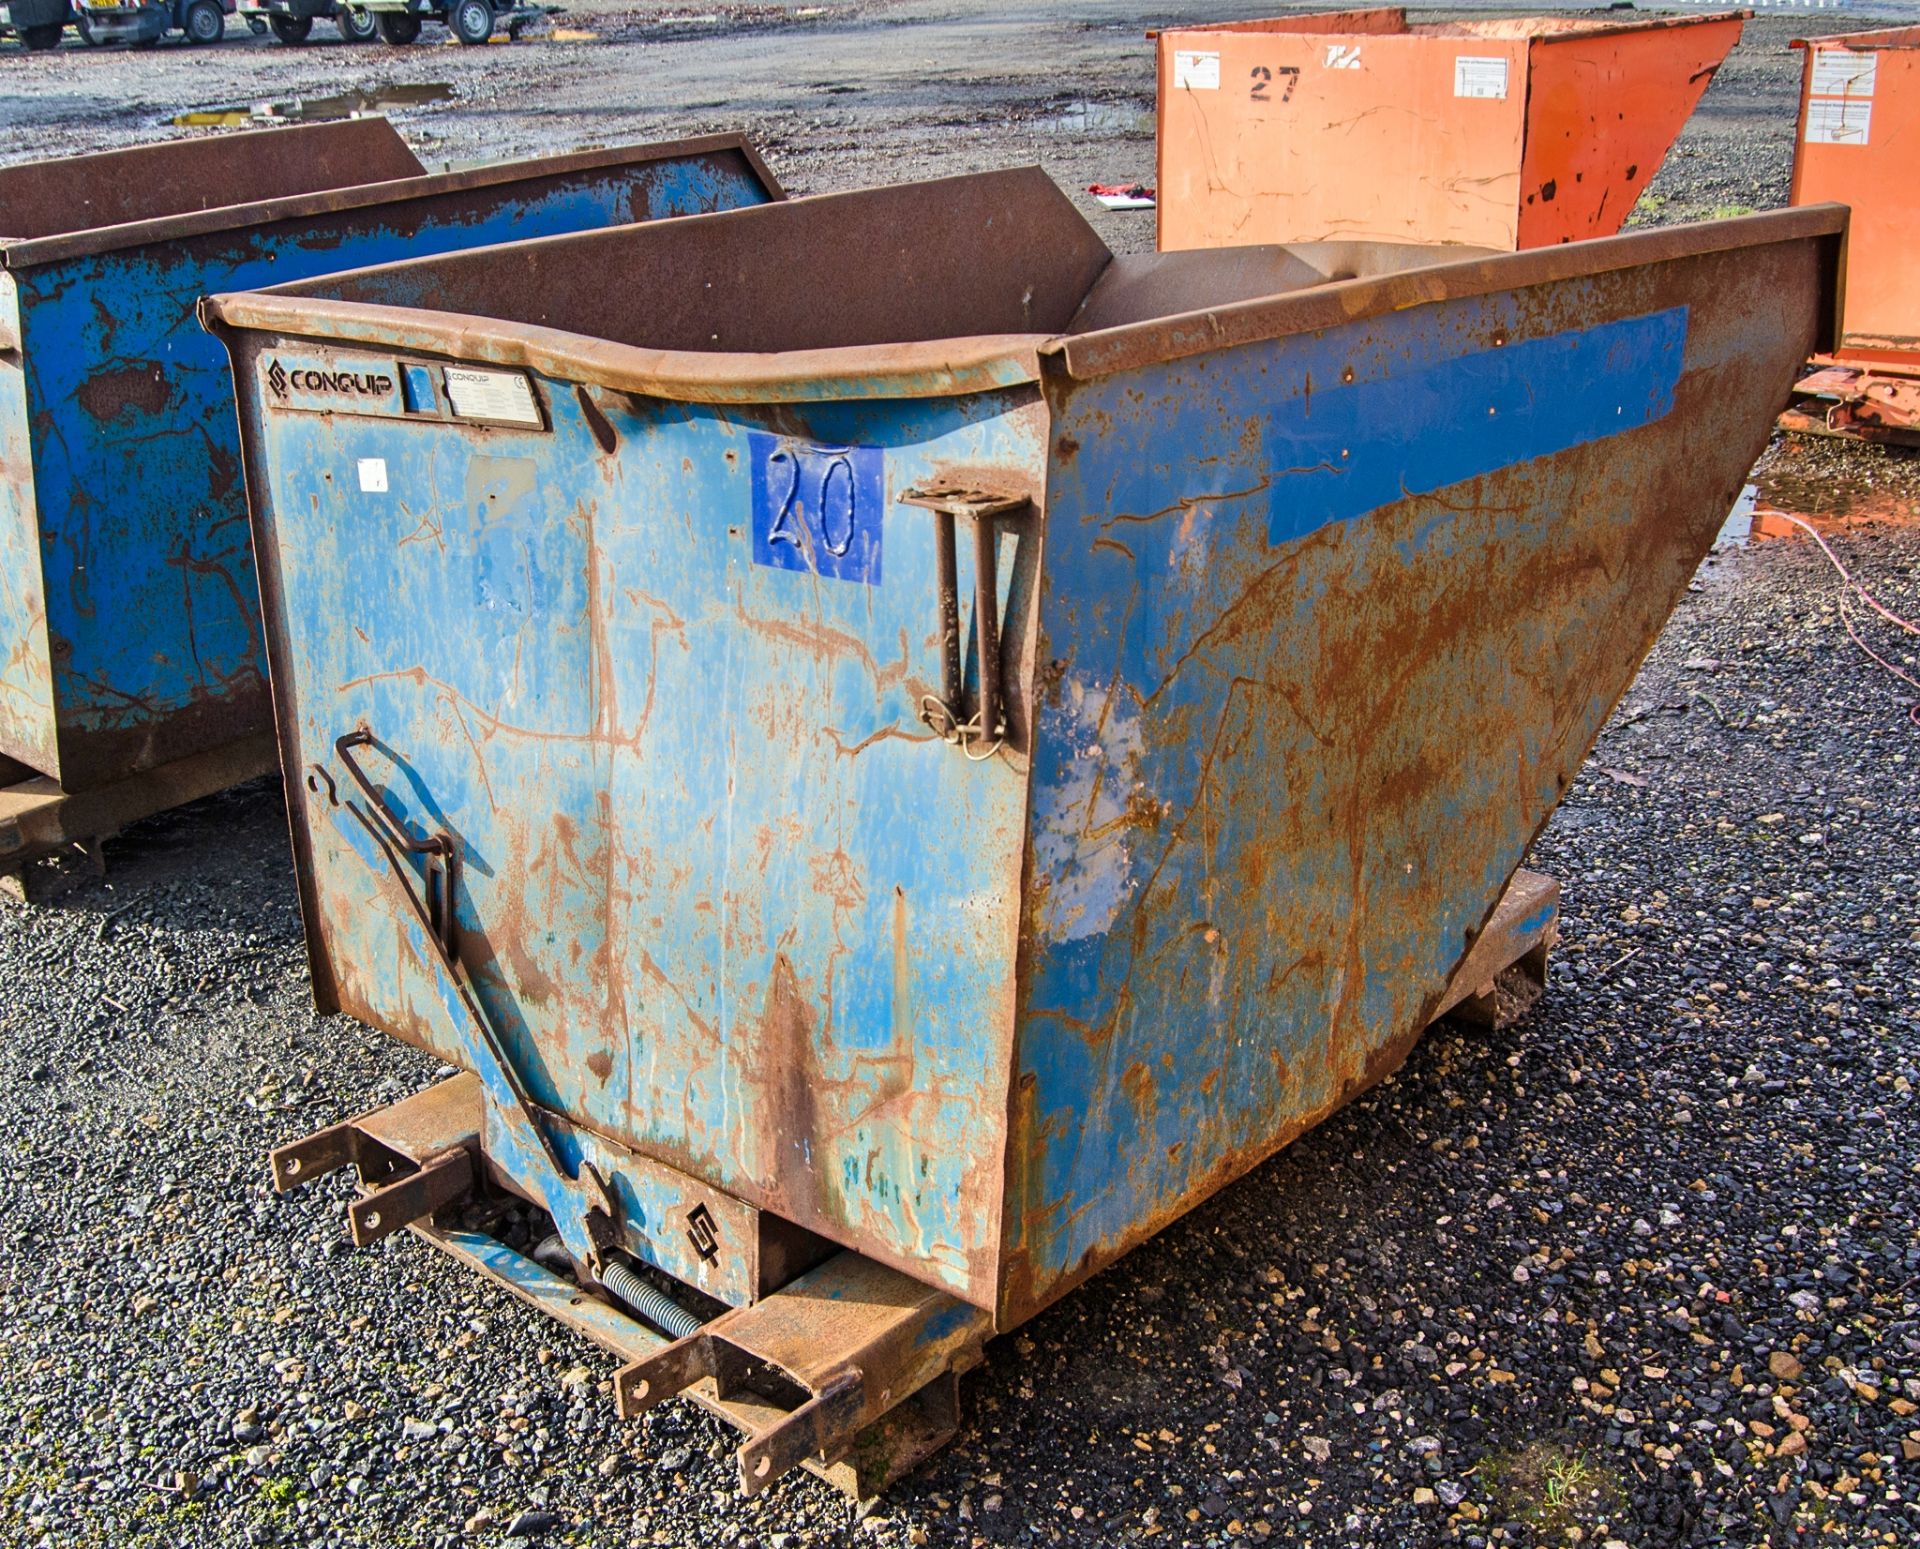 Conquip steel skip TS20 - Image 2 of 2